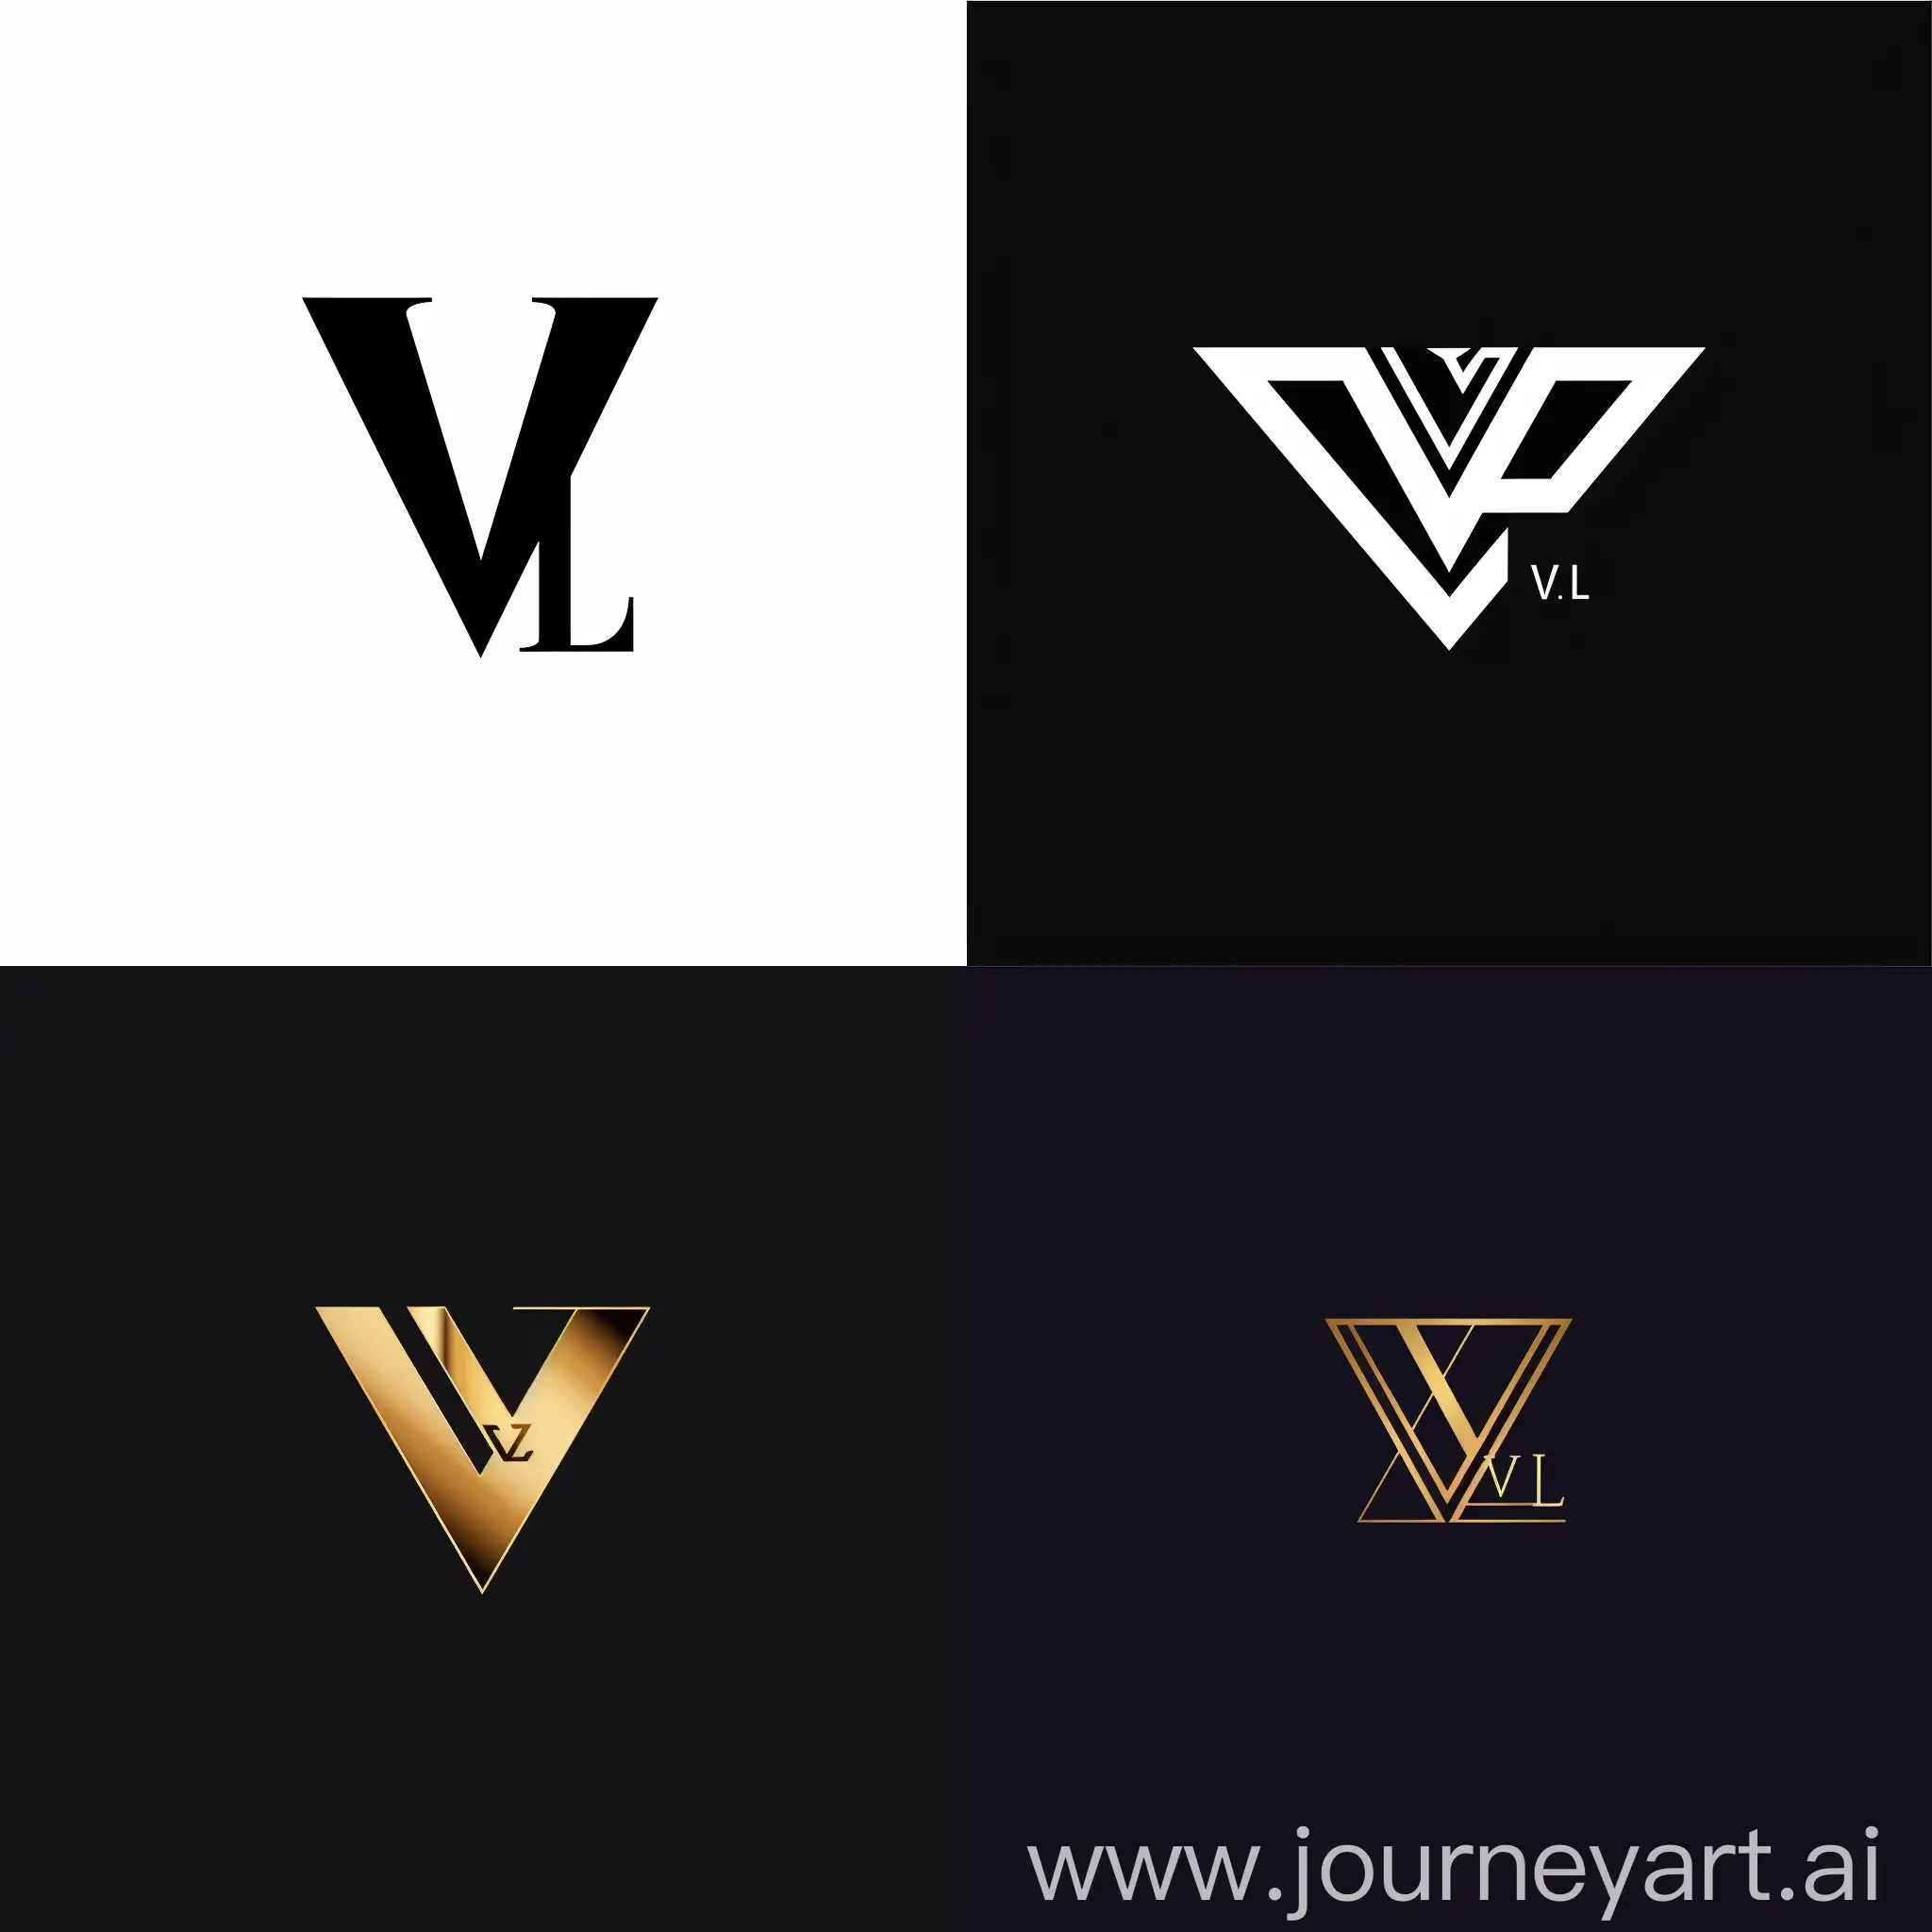 generate a business logo, minimalist, sophisticated, attract business entrepreneur, using alphabet VL